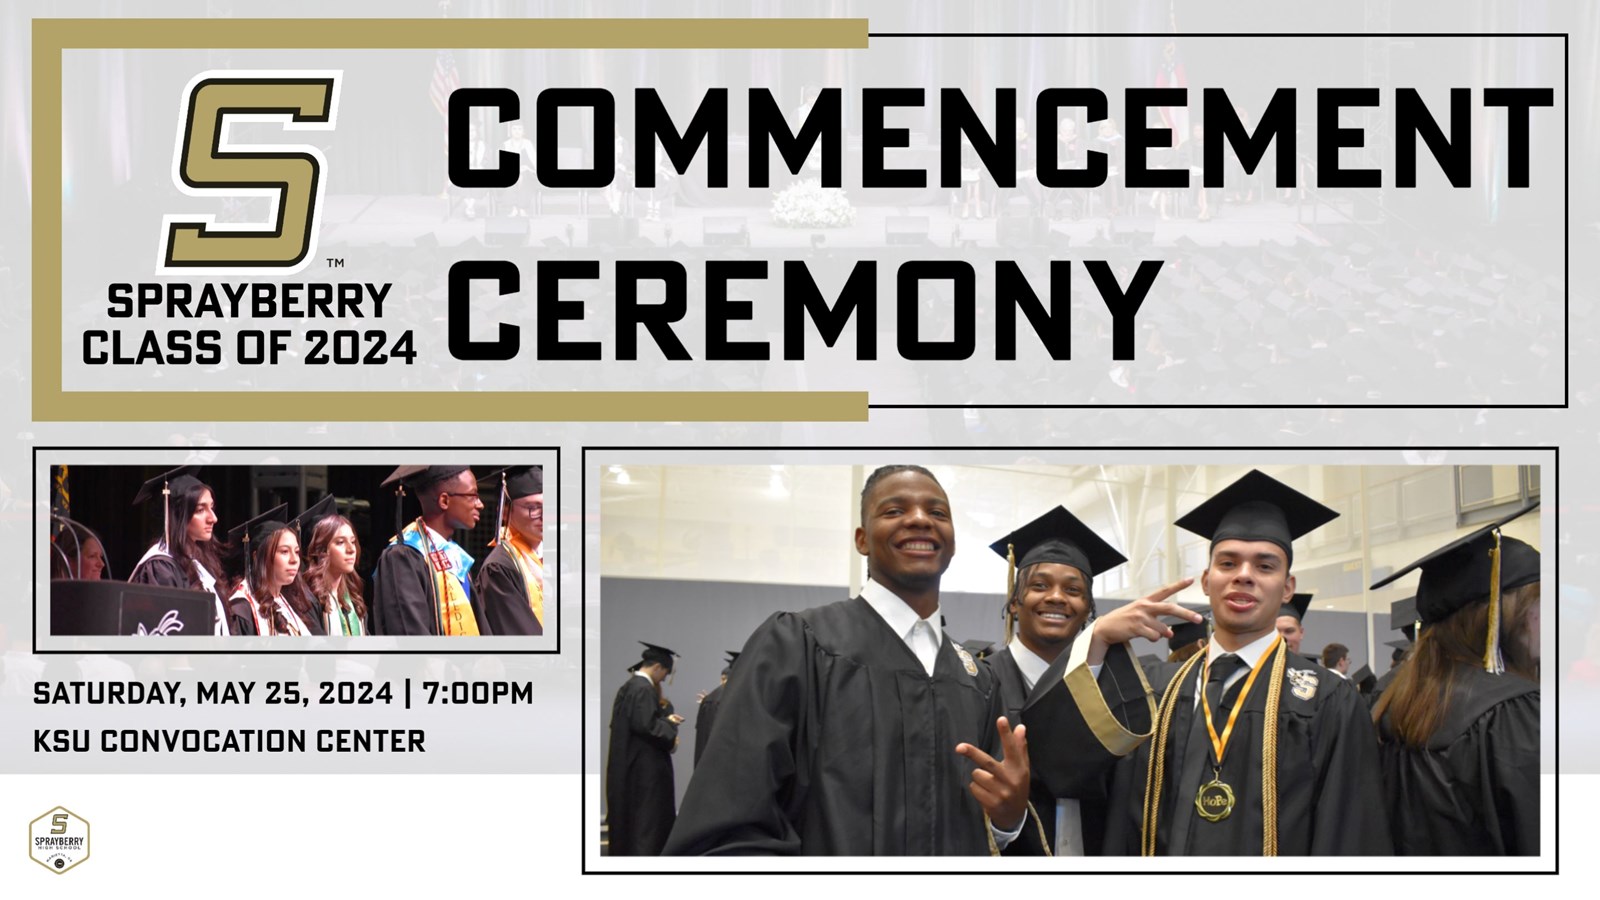 Class of 2024 | Commencement Ceremony| Sprayberry High School